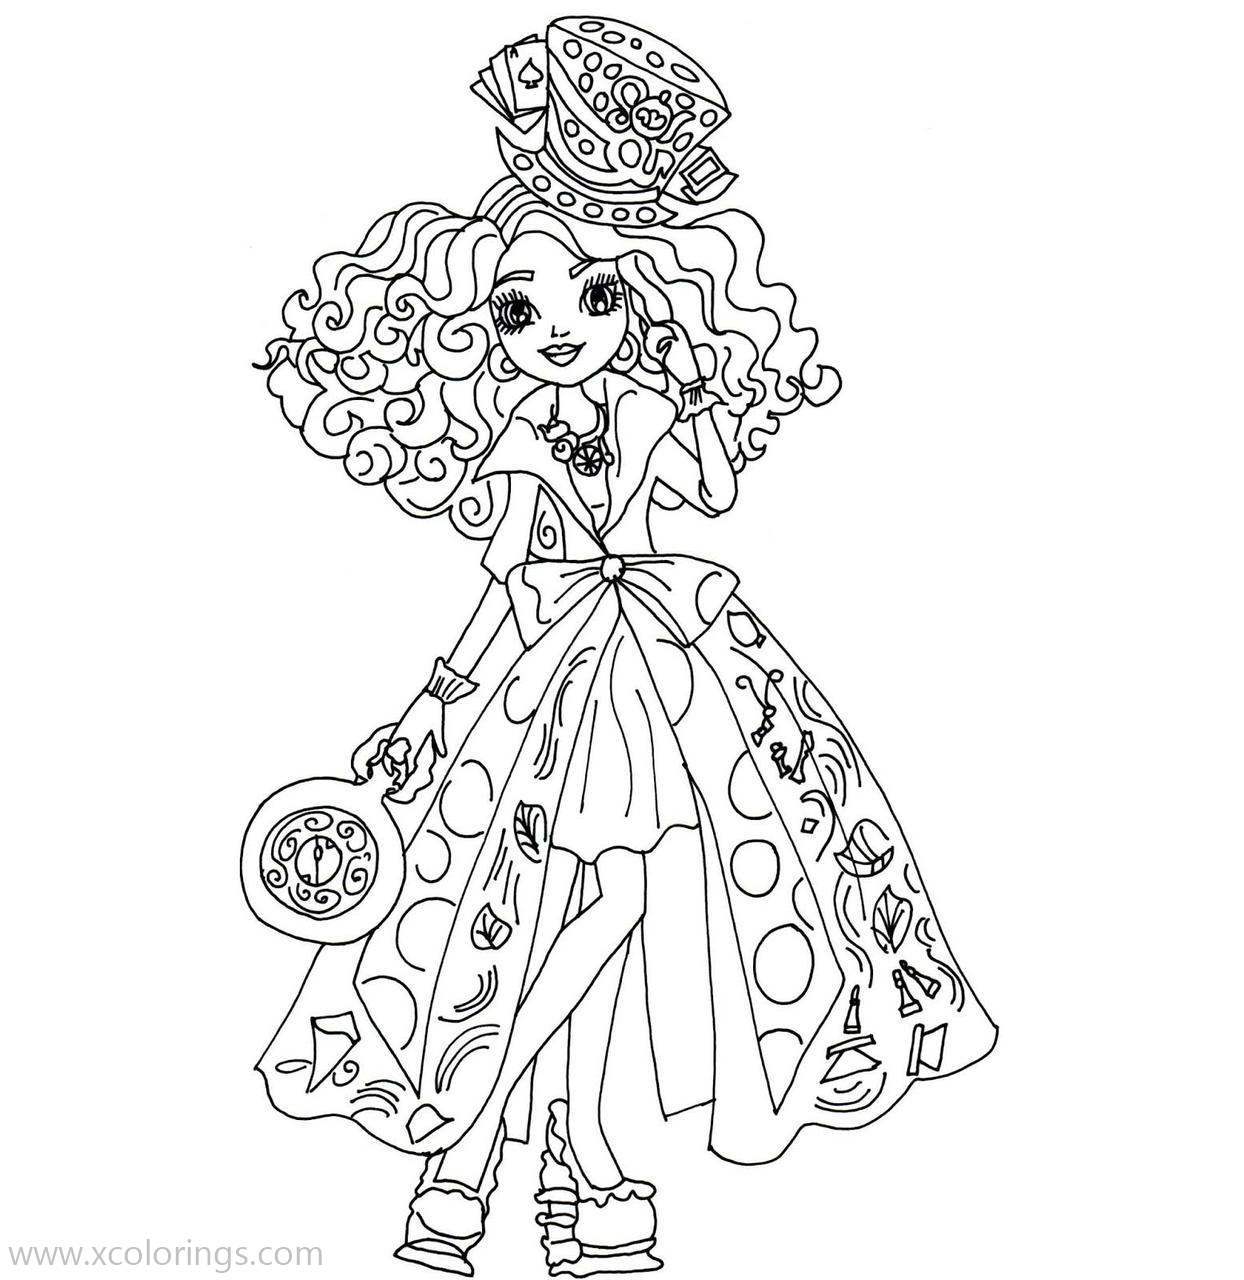 Free Ever After High Coloring Pages Girl with A Big Hat printable